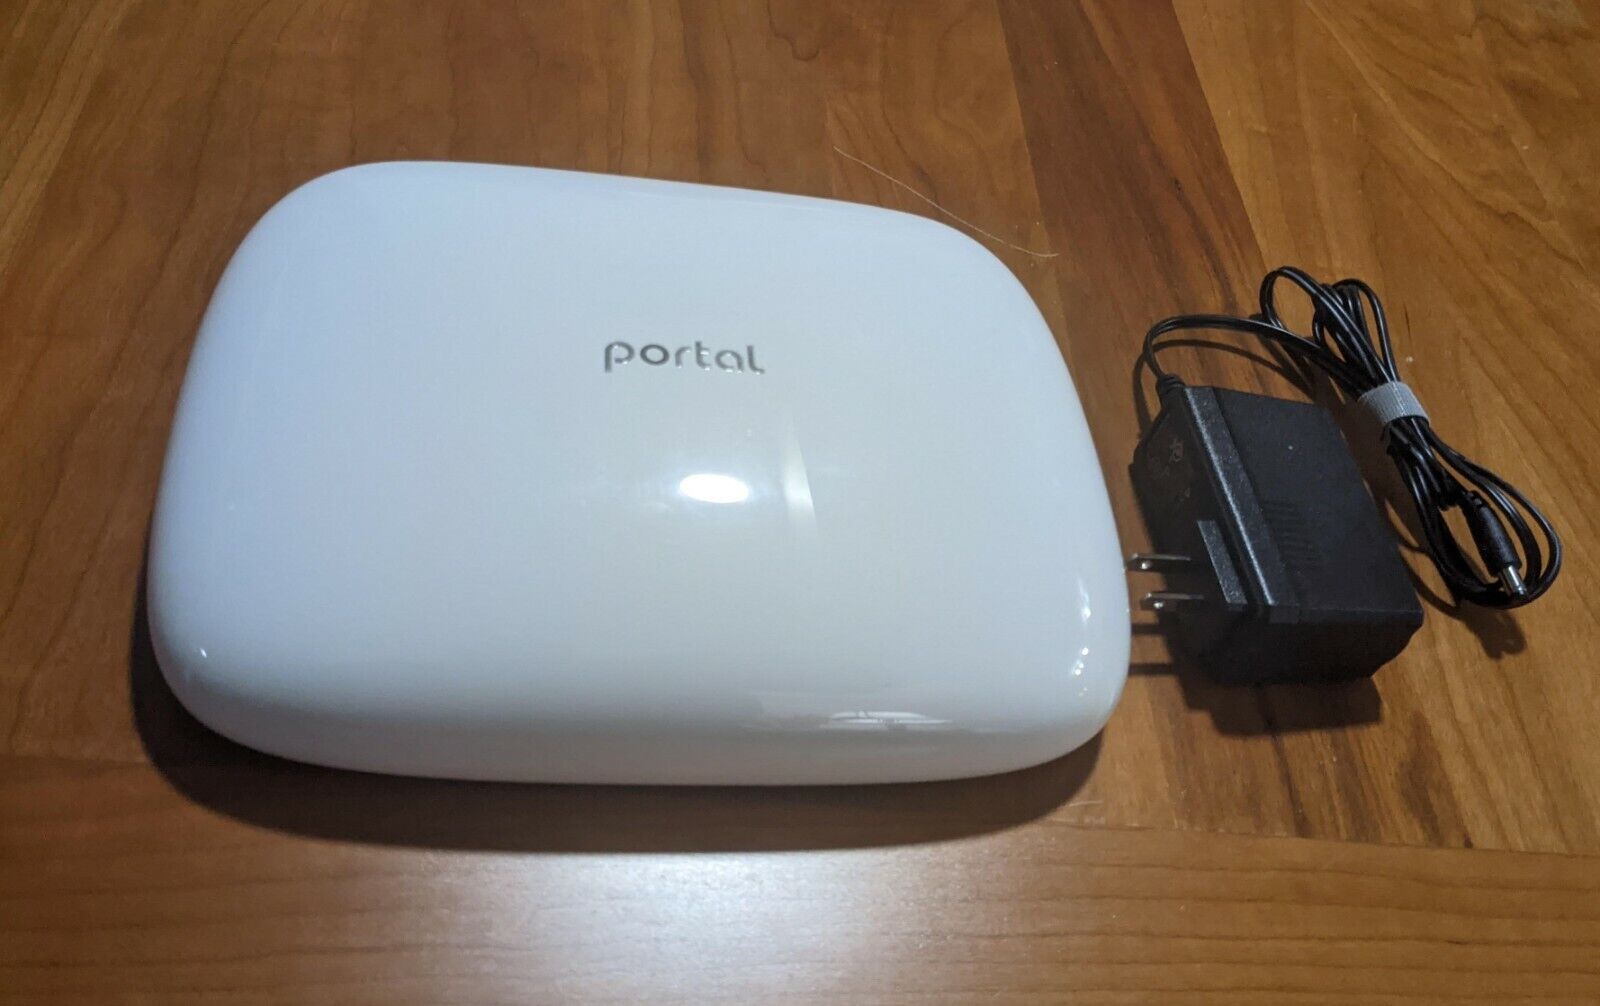 Portal Wireless Router - White -  Up-To 3000 Sq Ft. - Very Good Condition